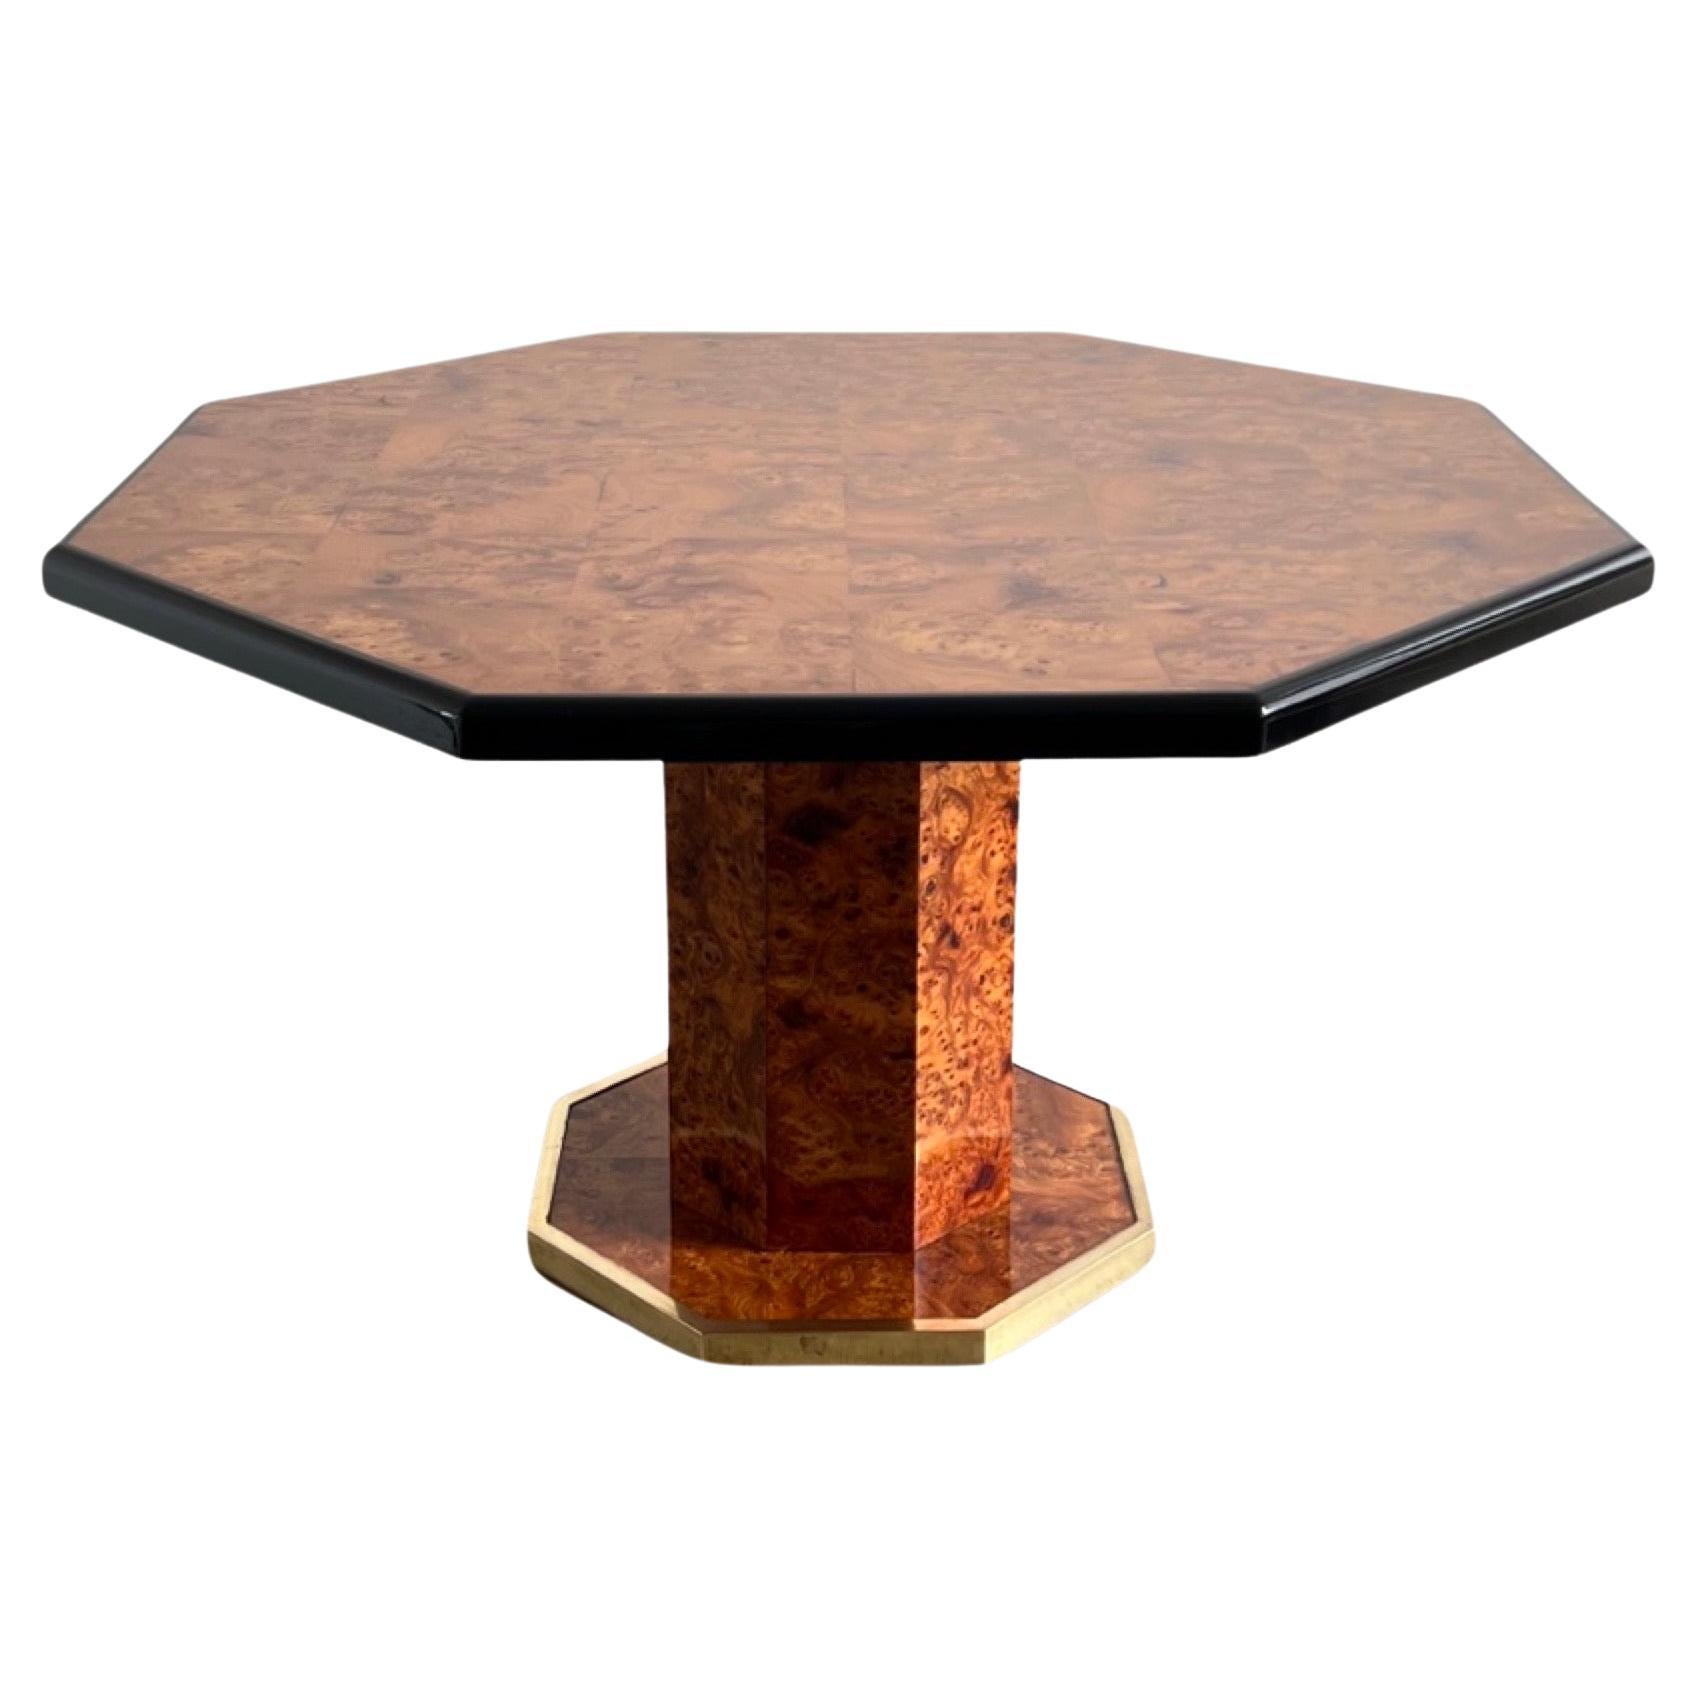 Willy Rizzo for Mario Sabot Octagonal Dining Table